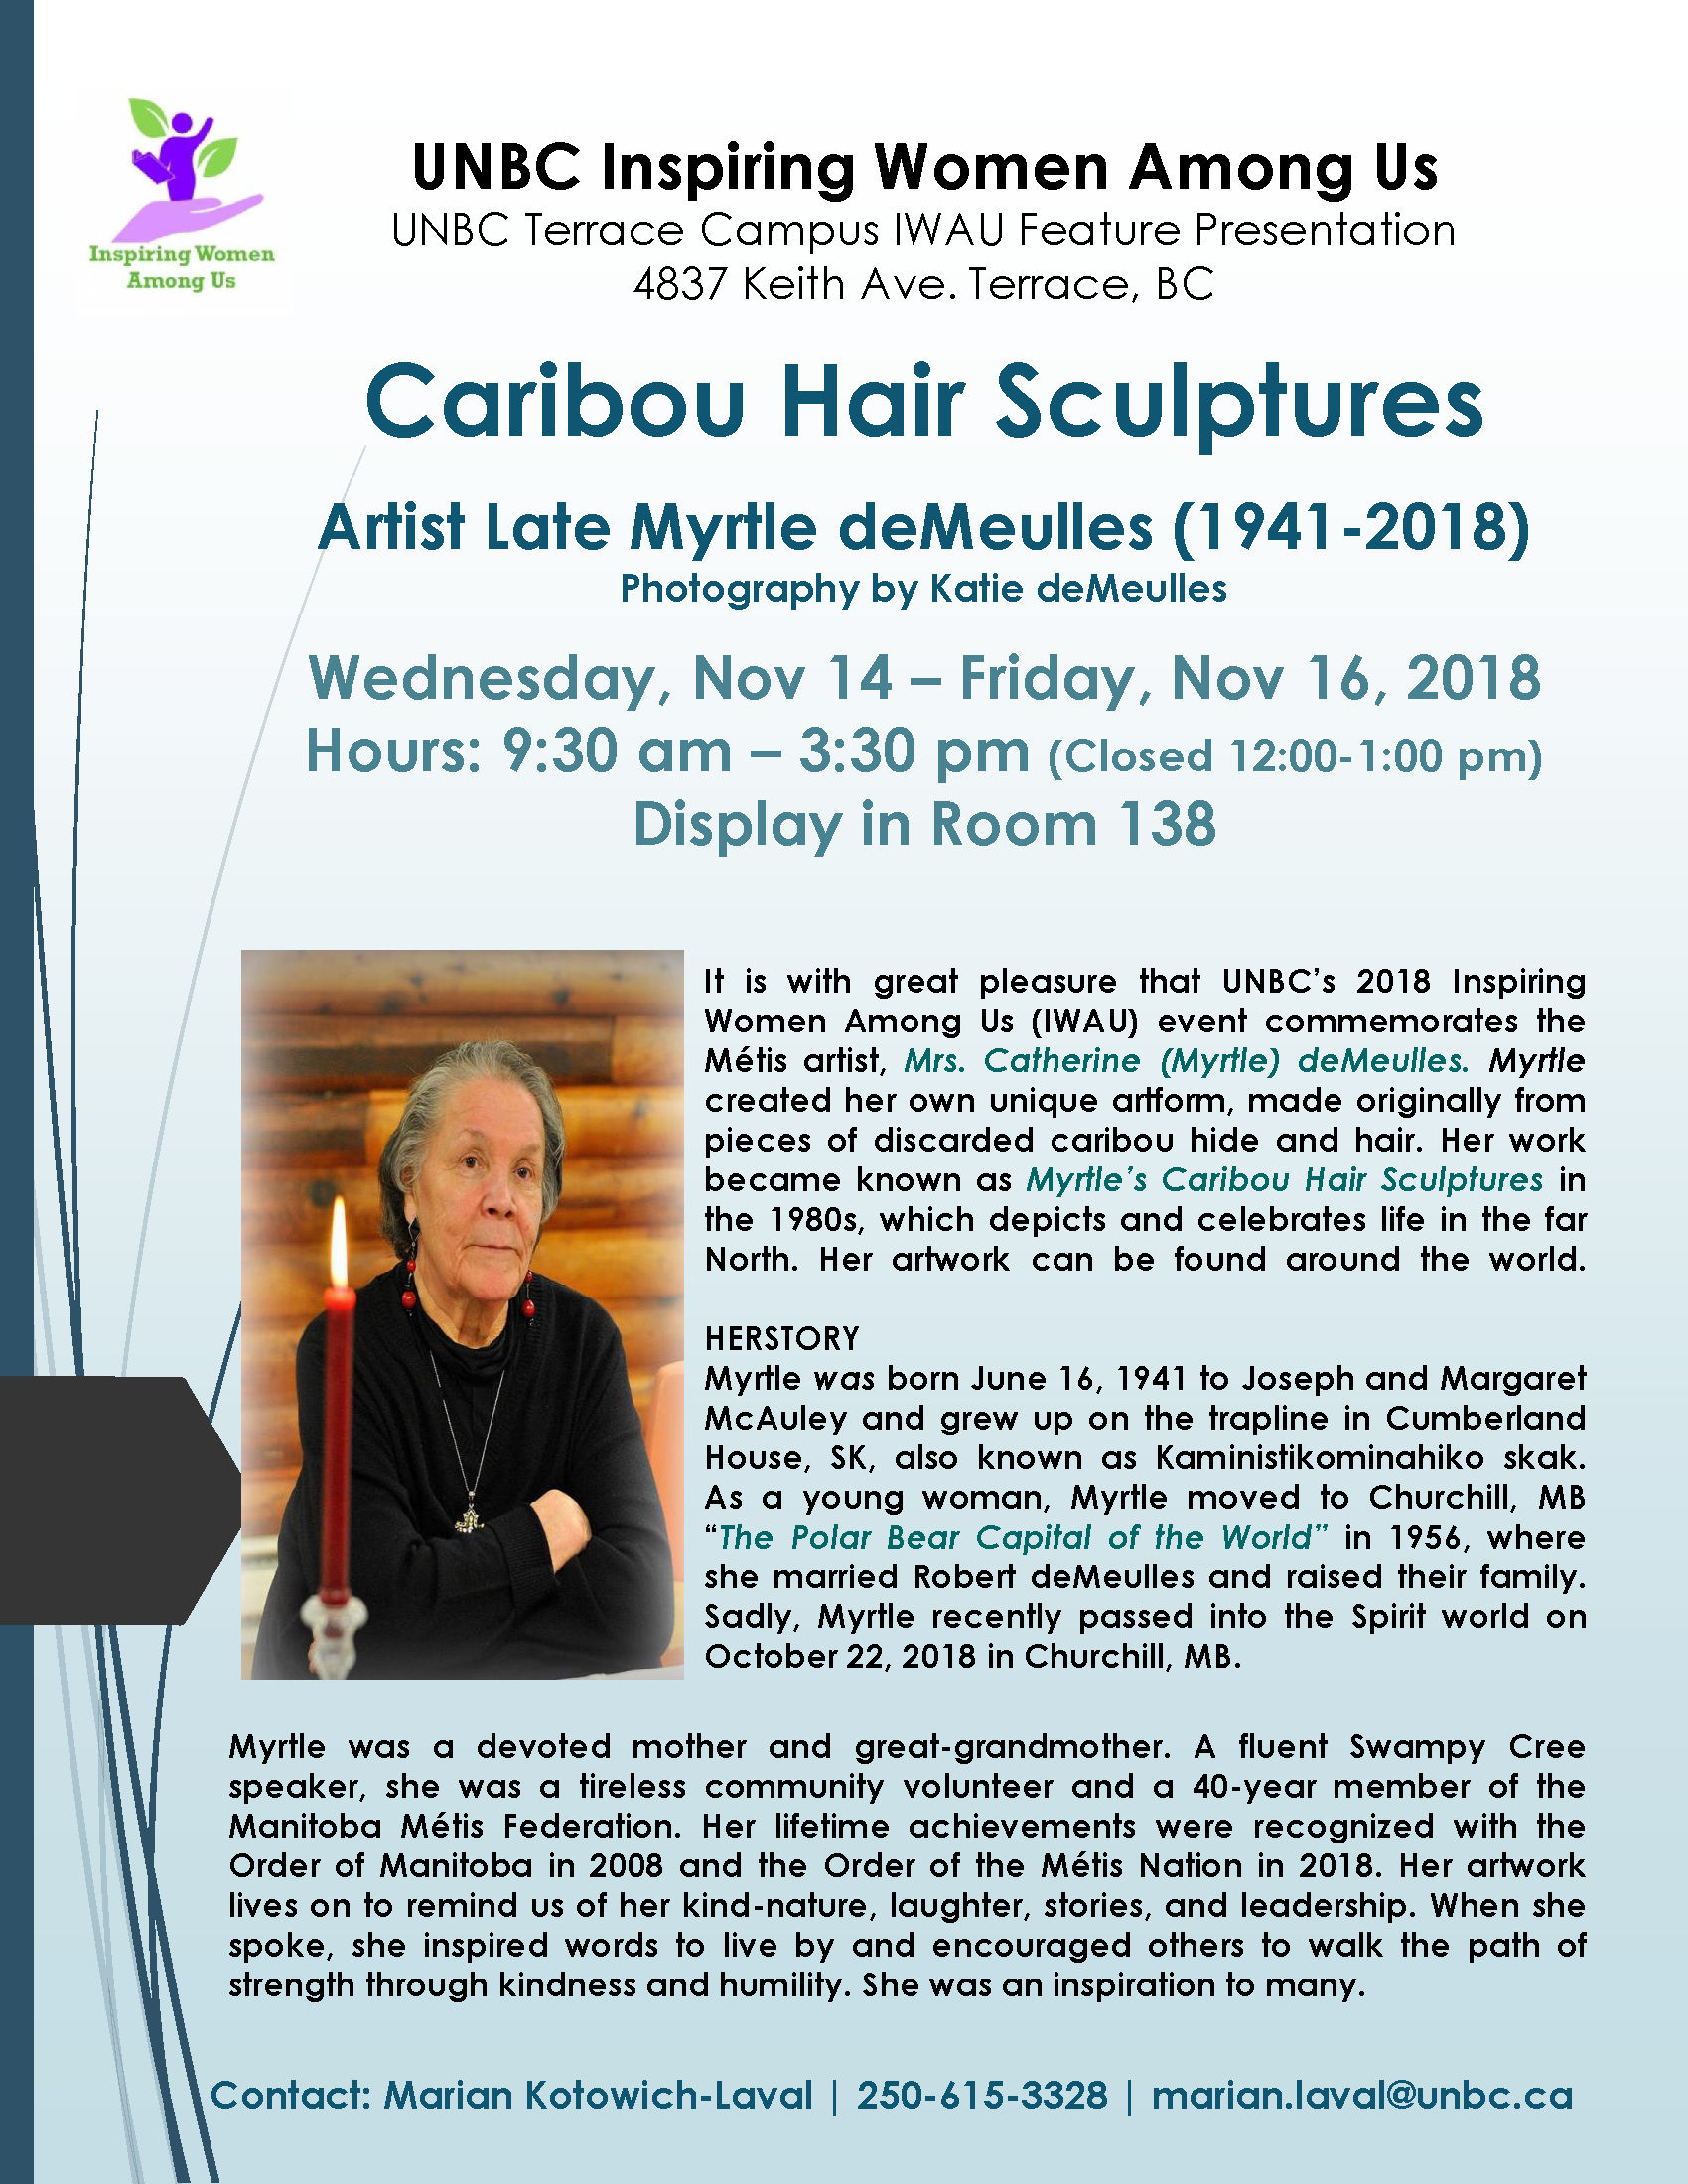 Caribou Hair Scultpures by the late Myrtle deMeulles